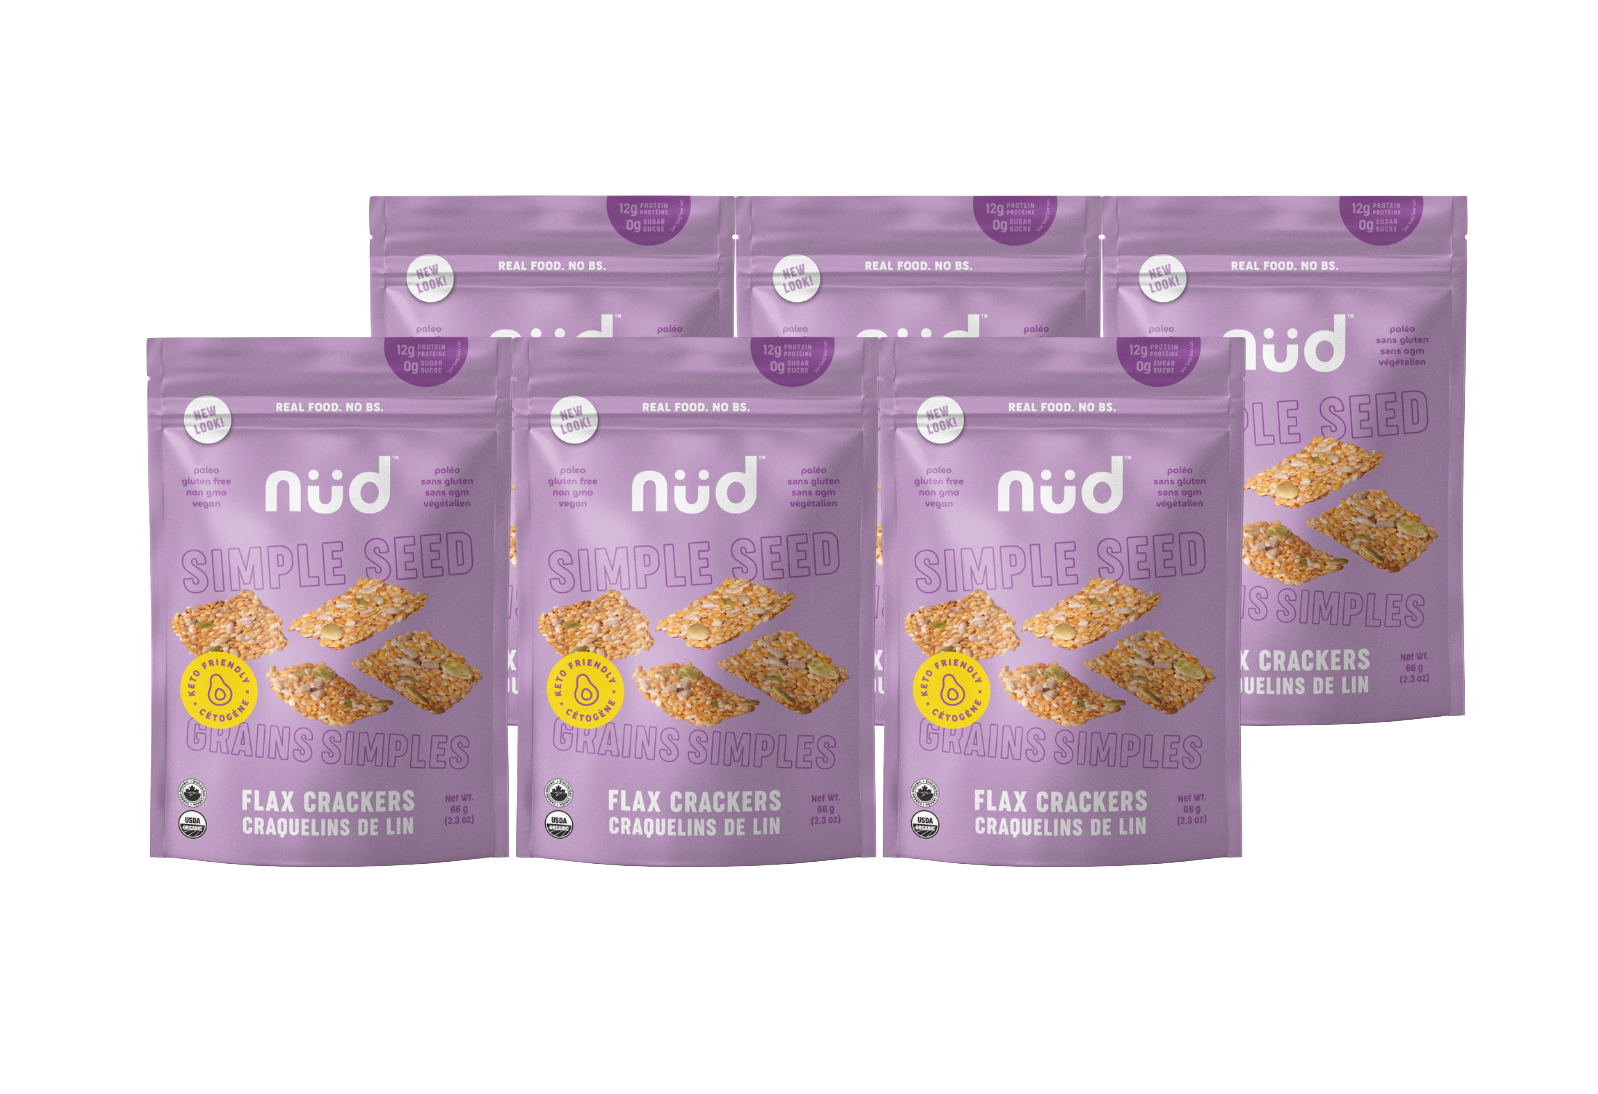 Discover crunchy seed delight with NUD Keto Simple Seed Flax Crackers! Made with pure, organic ingredients, these keto-friendly crackers offer 1g net carbs, 5g fiber, & 4g protein. Enjoy them plain or with dips for a satisfying & nutritious snack. Shop now & experience the NUD difference!